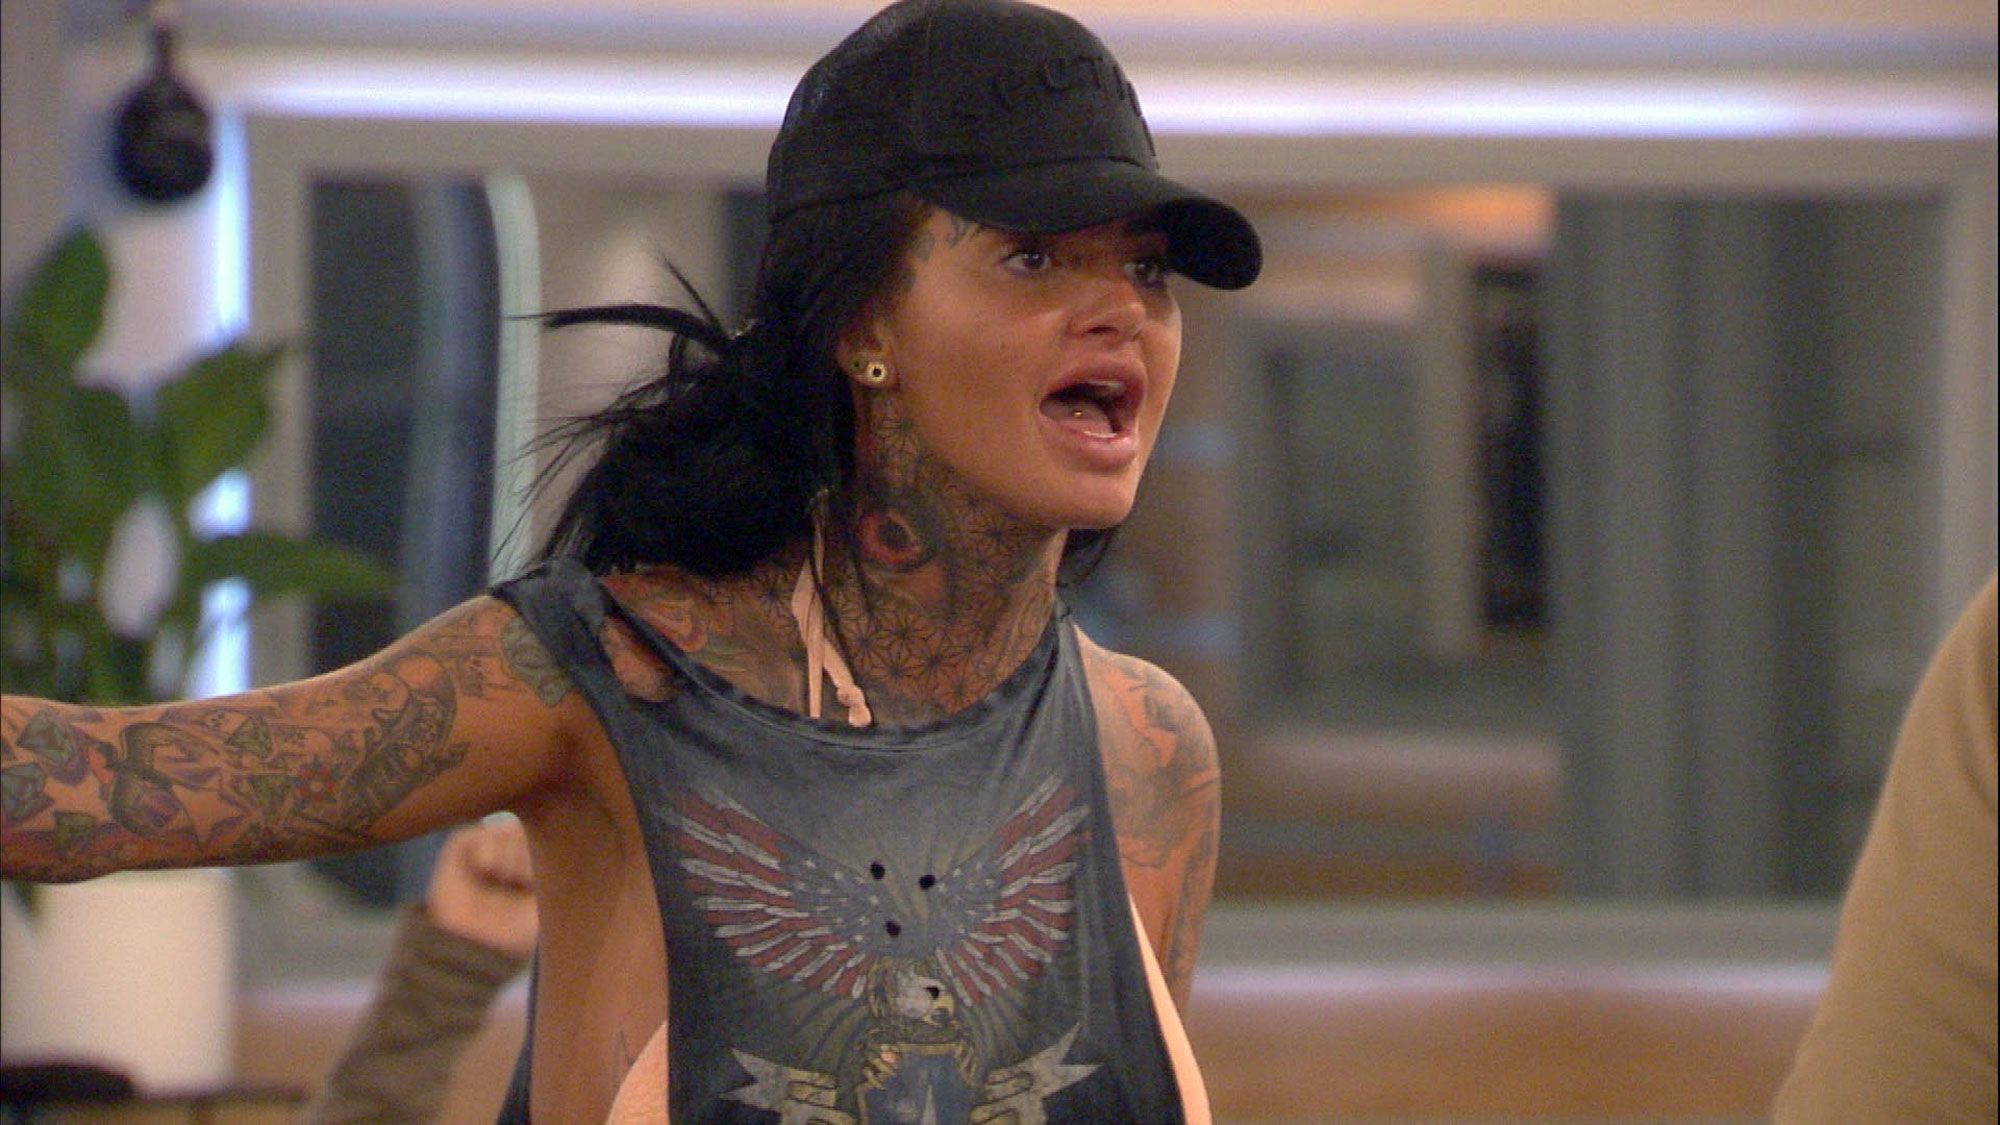 Celebrity Big Brother's Jemma Lucy dubs Paul Danan a "f**king snaky in row over Sarah Harding